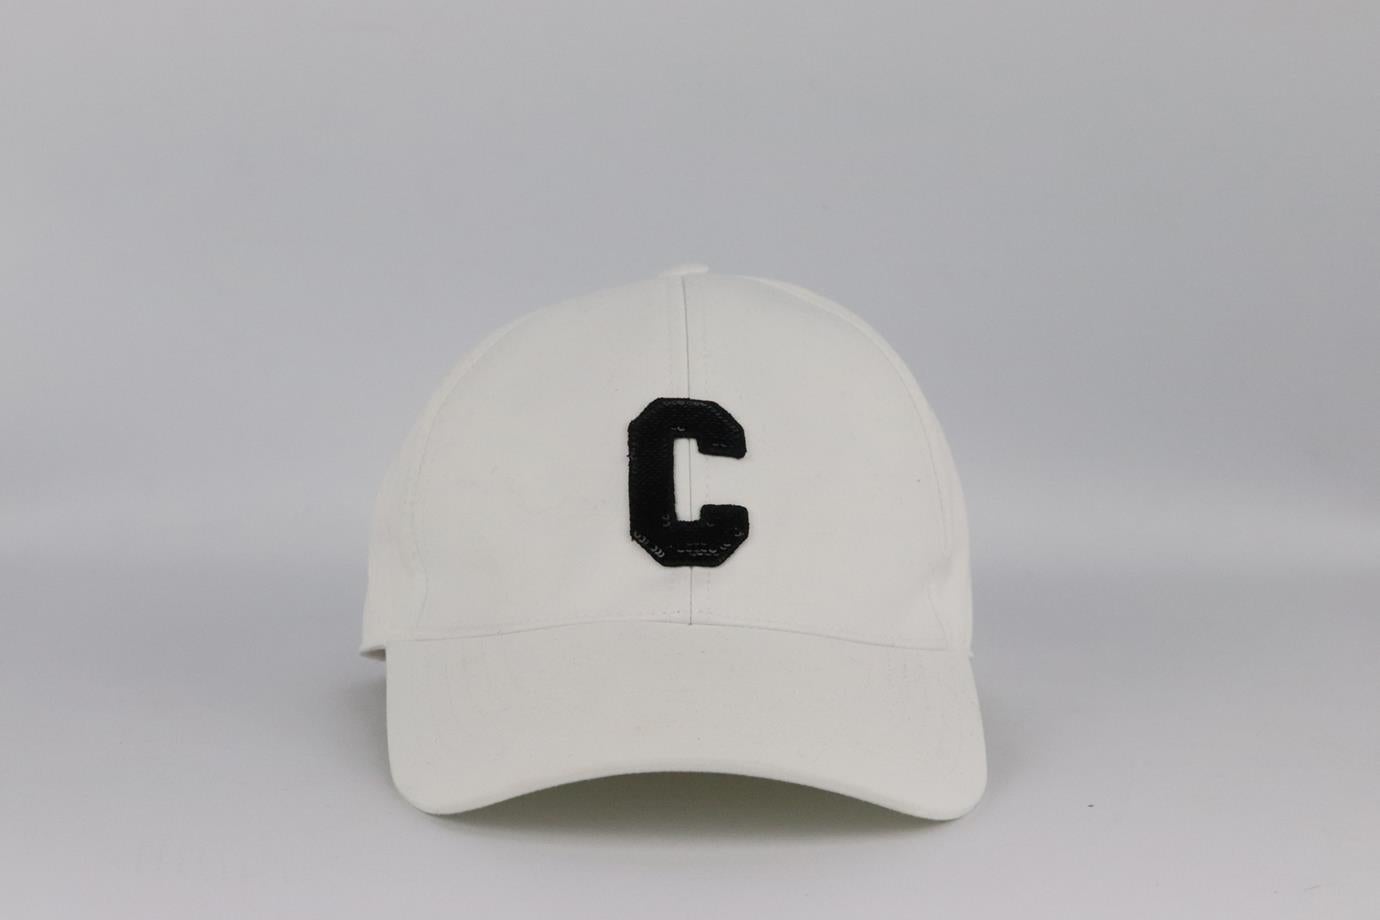 Celine sequin embellished cotton twill baseball cap. White. Slide fastening at back. Does not come with dustbag. Size: Small. Circumference: 22 in. Brim Width: 3 in. Very good condition - Small mark on interior fabric; see pictures.